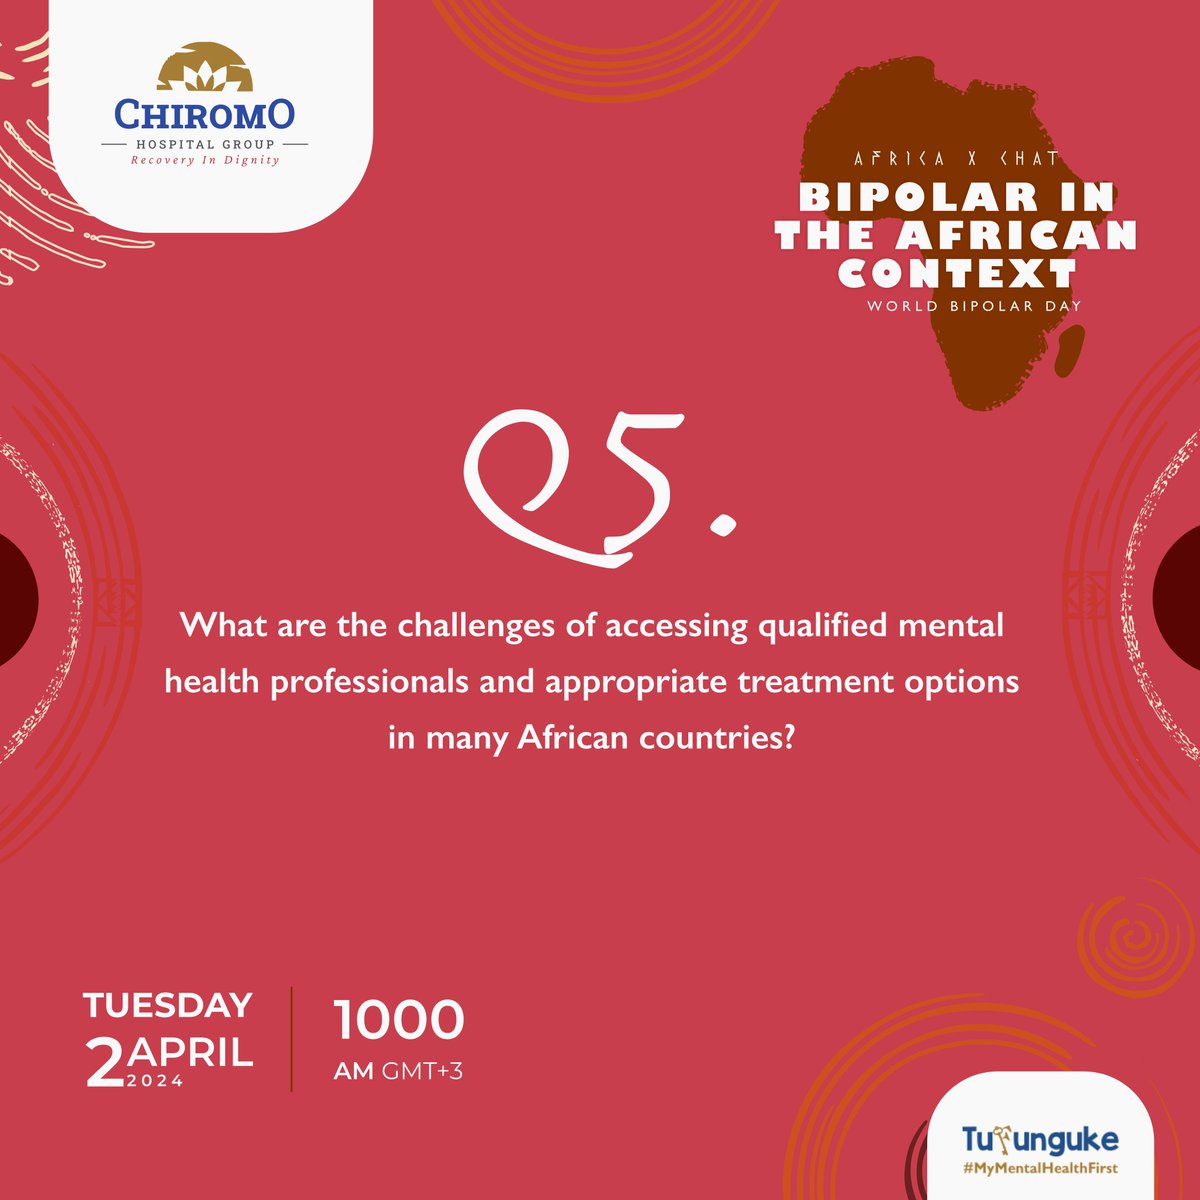 Q5. What are the challenges of accessing qualified mental health professionals and appropriate treatment options in many African countries? #Tufunguke about #bipolar